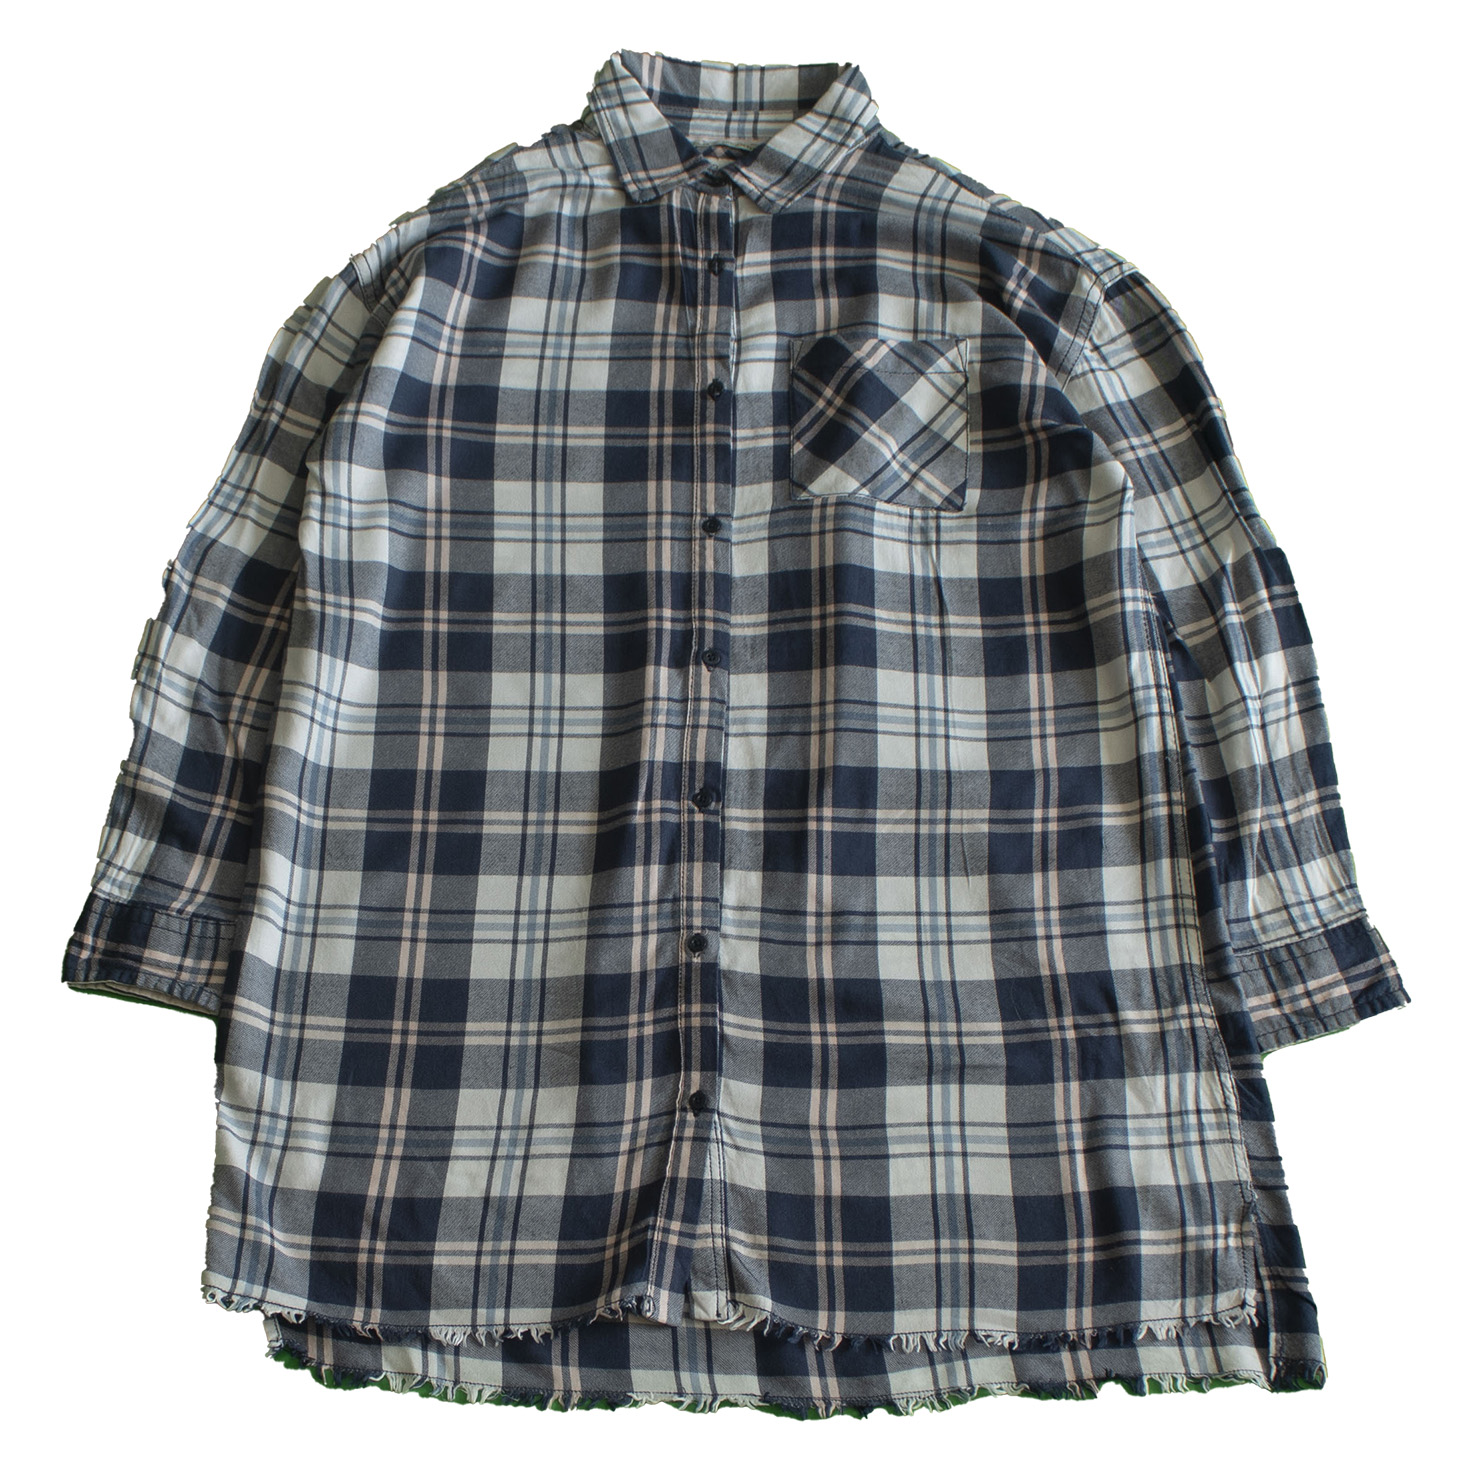 Robe chemise carreaux pepe jeans 10 ans